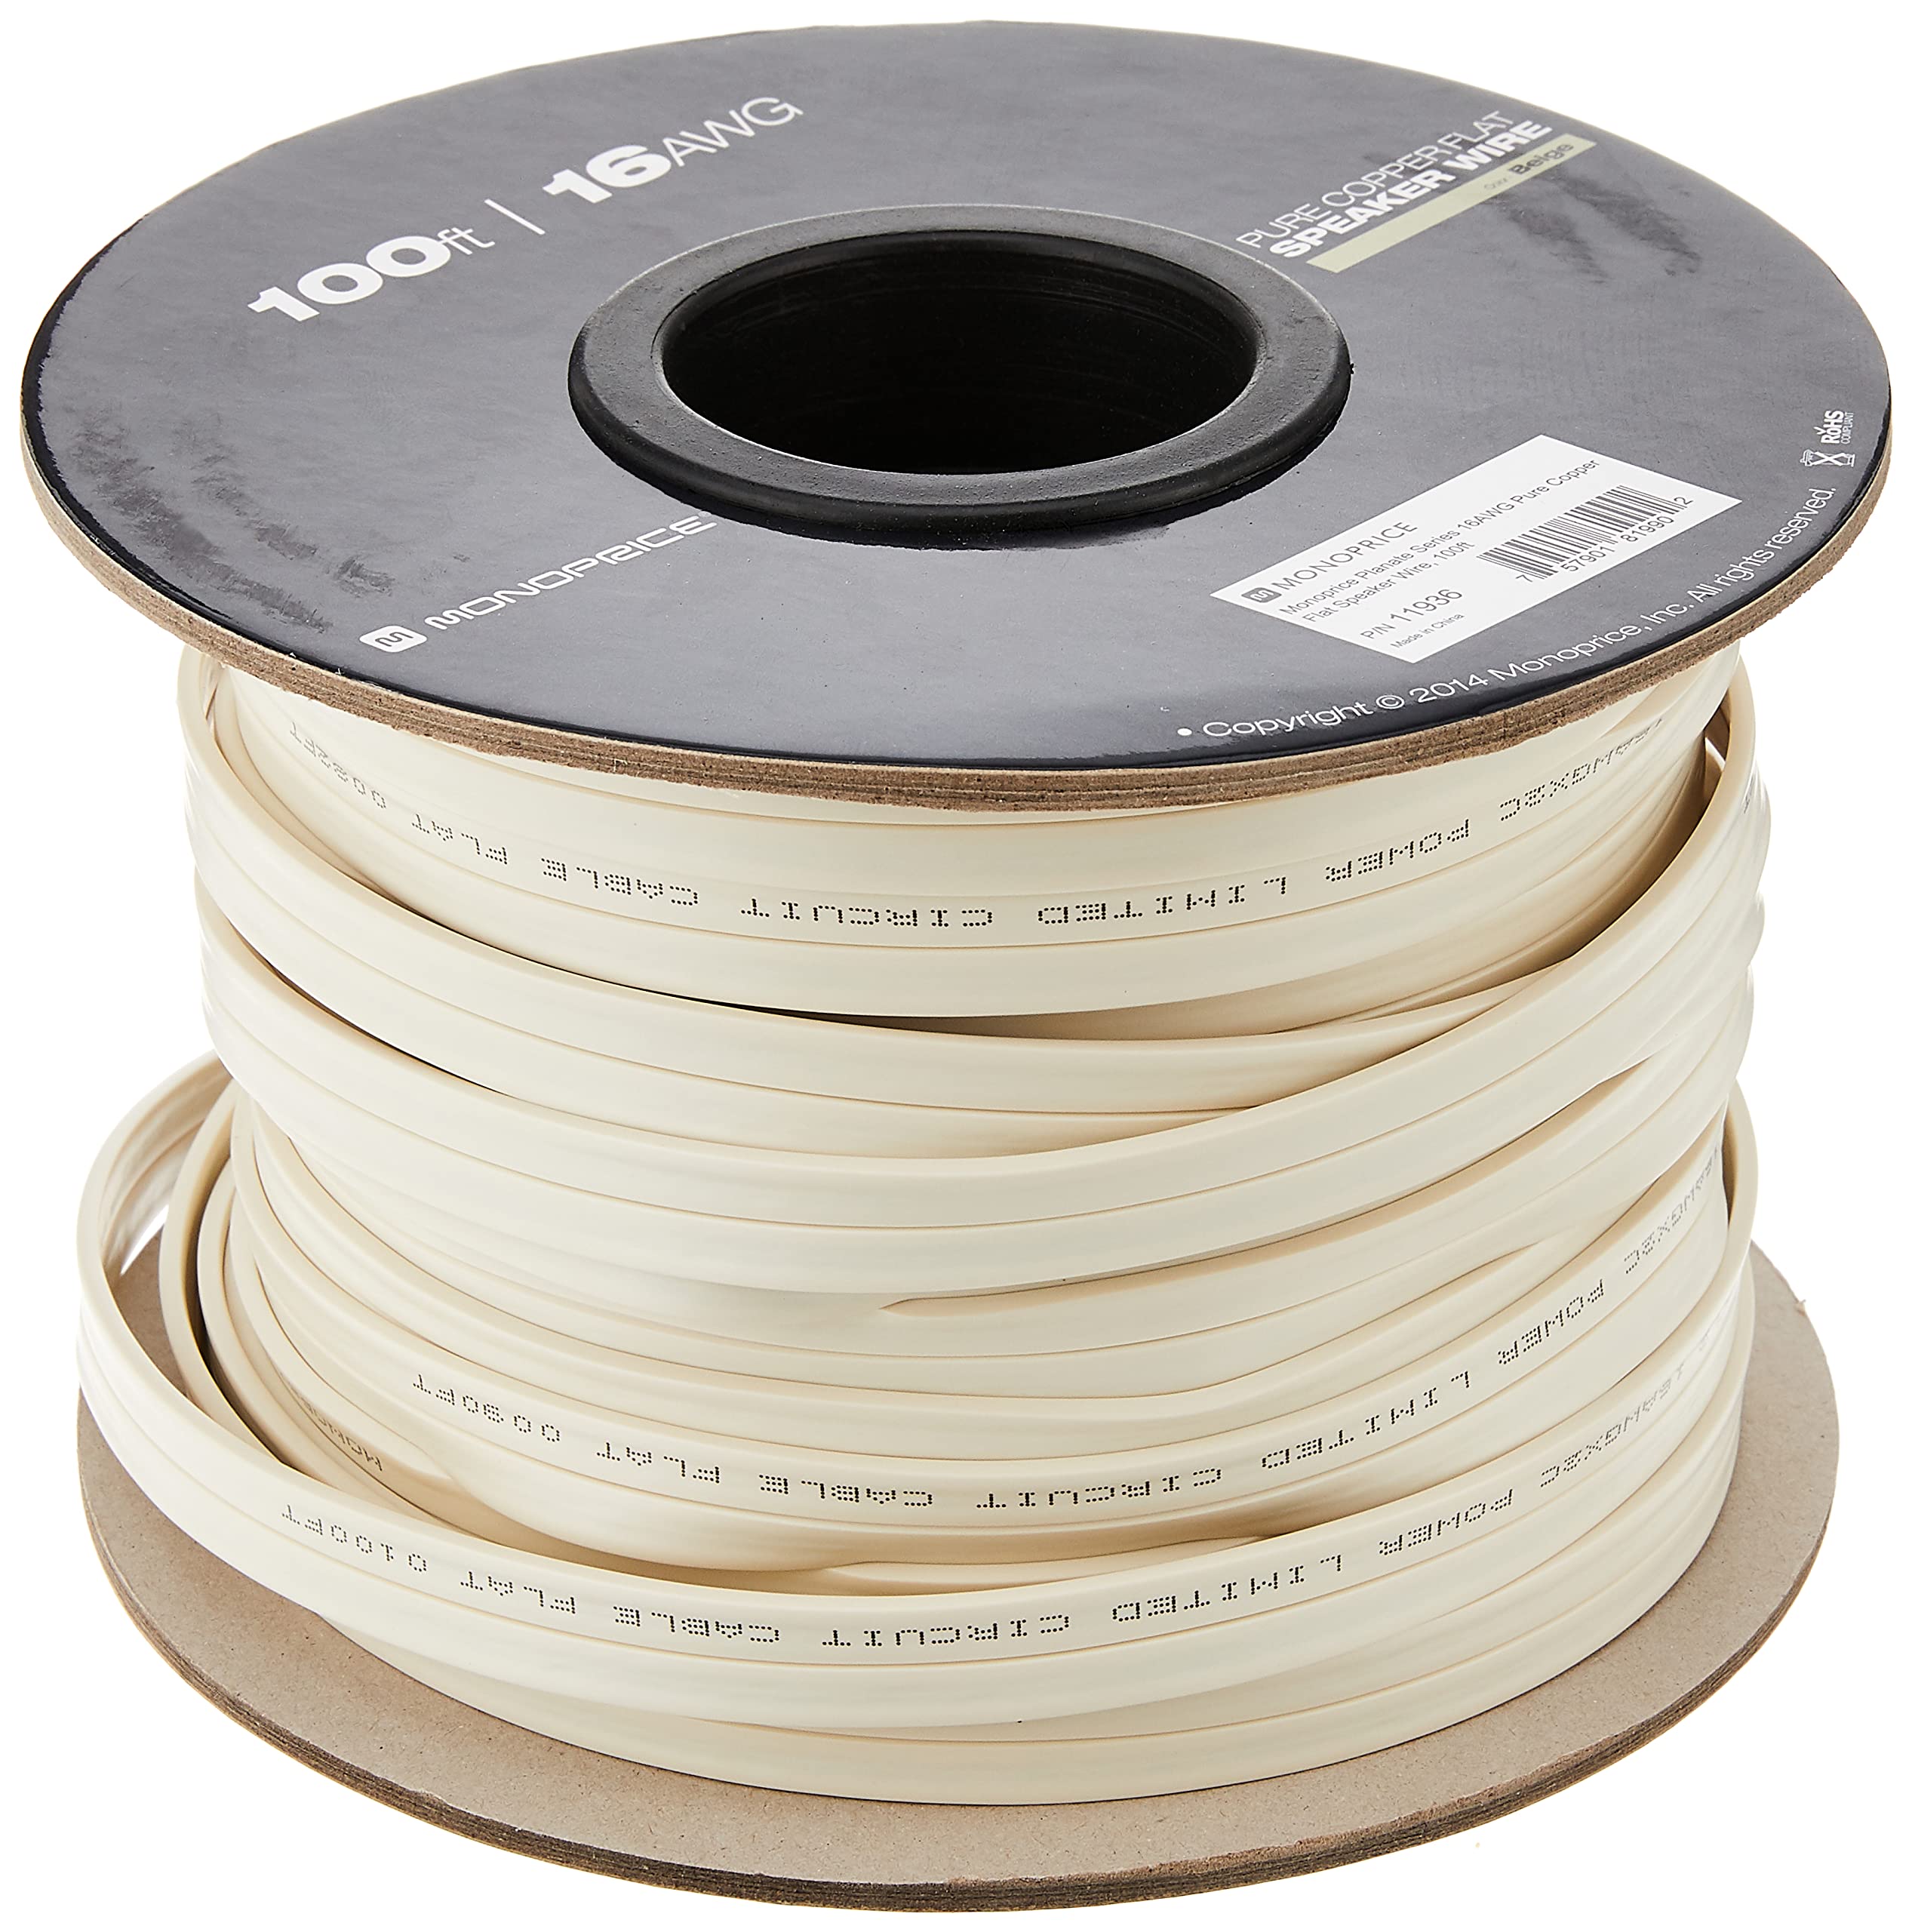 Monoprice Planate Series 16 Gauge AWG Pure Copper Flat Speaker Wire/Cable - 100Ft CL2 in Wall Rated, Jacketed in PVC Material for Home Theater, Car Audio and More